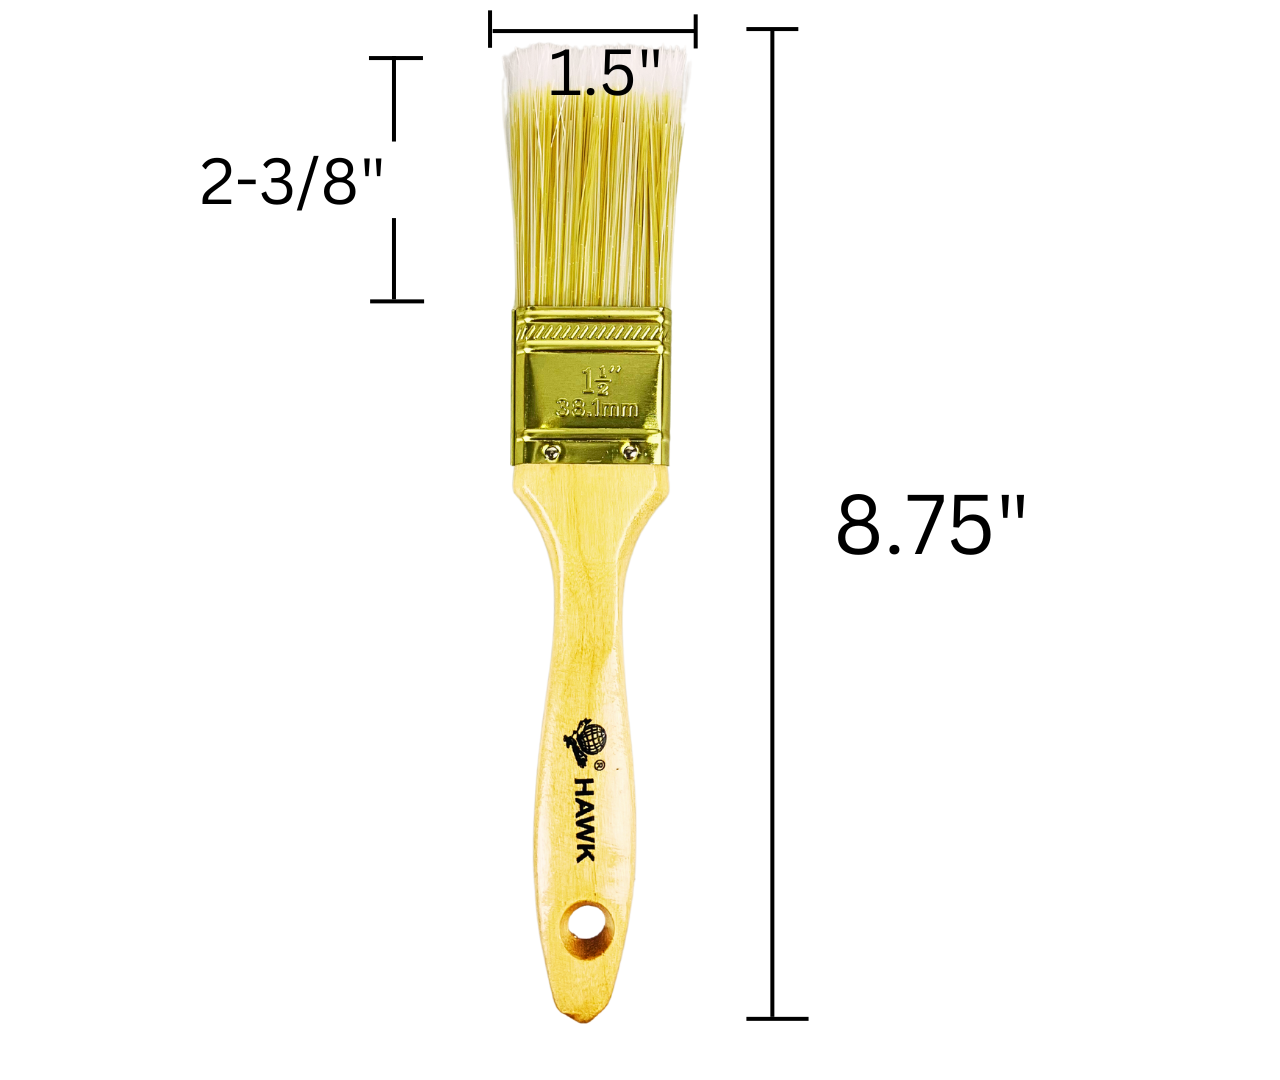 1.5" Wide Bristle Brush for House Painting, Varnish or Lacquer, Wooden Handle (Pack of: 2) - TZ63-28435-Z02